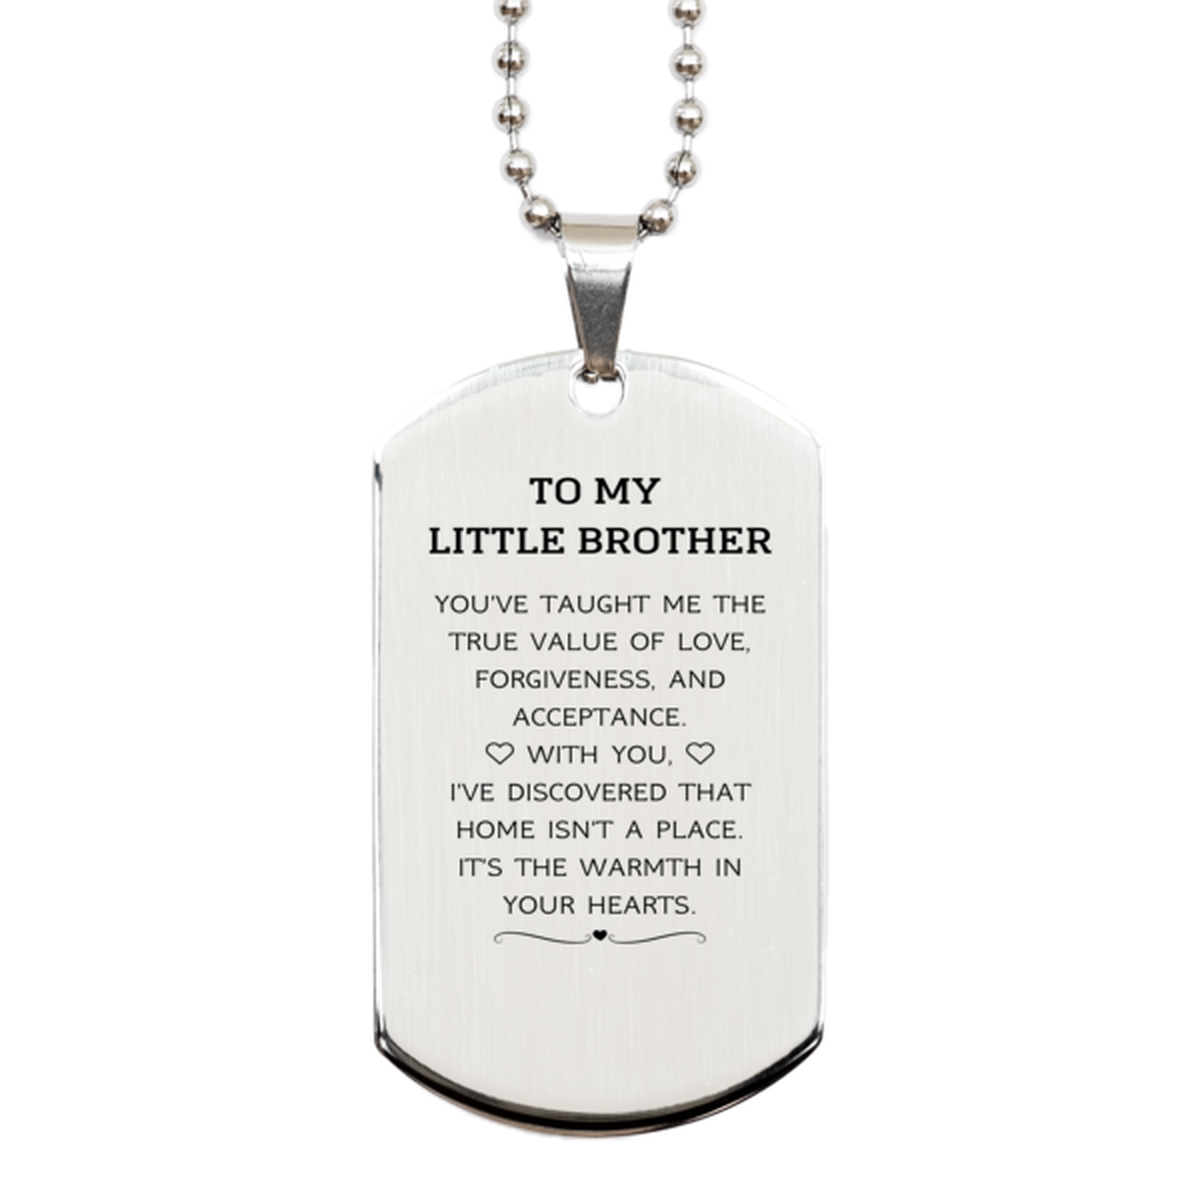 To My Little Brother Gifts, You've taught me the true value of love, Thank You Gifts For Little Brother, Birthday Silver Dog Tag For Little Brother